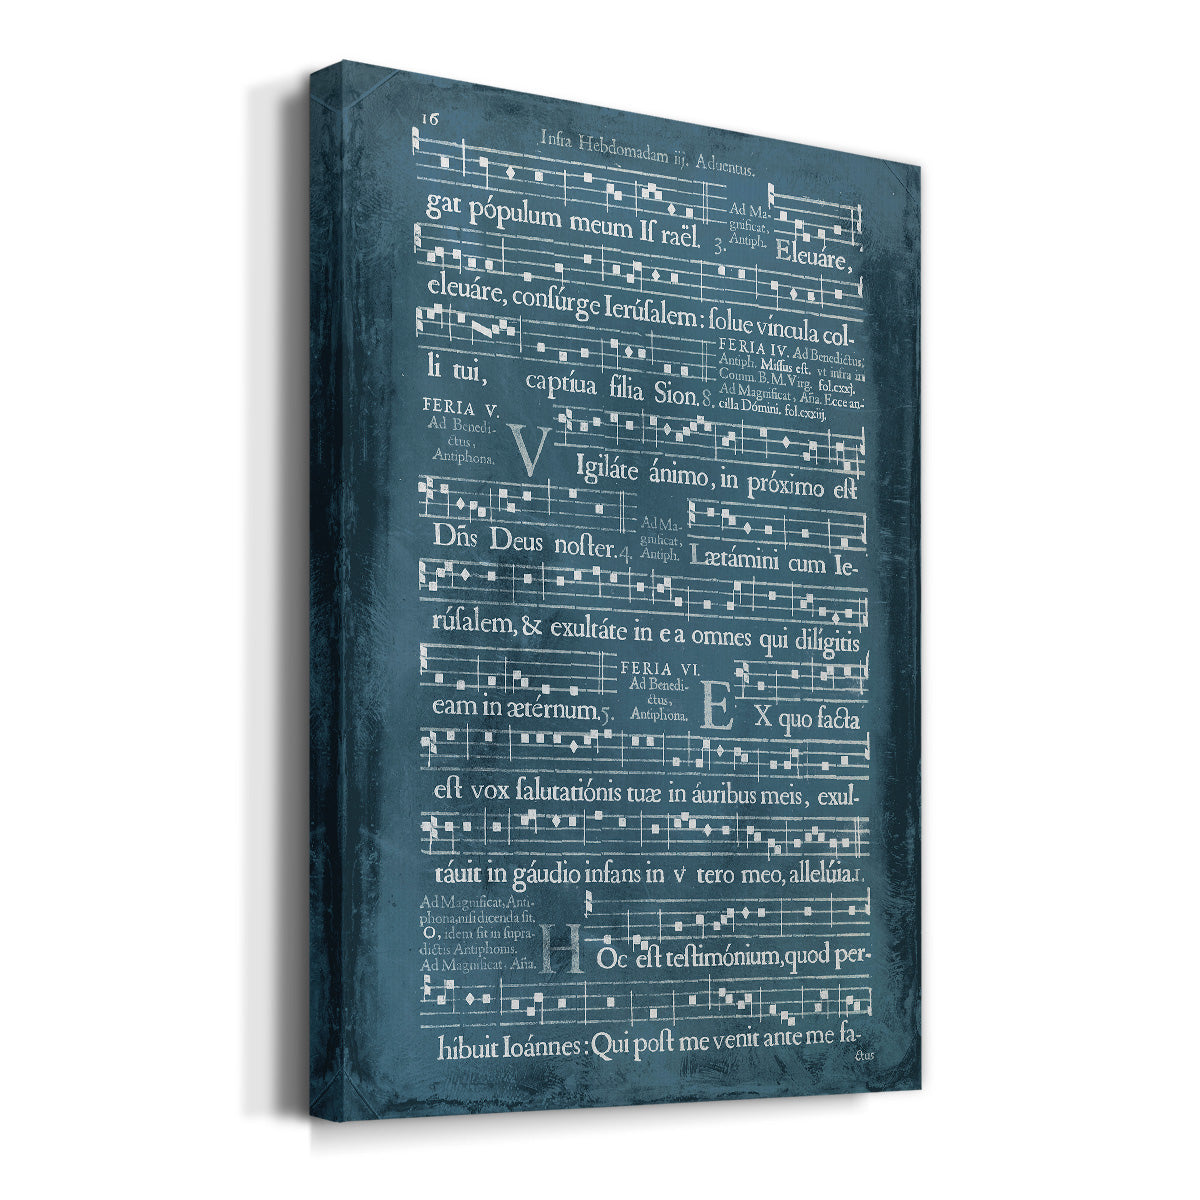 Graphic Songbook I Premium Gallery Wrapped Canvas - Ready to Hang